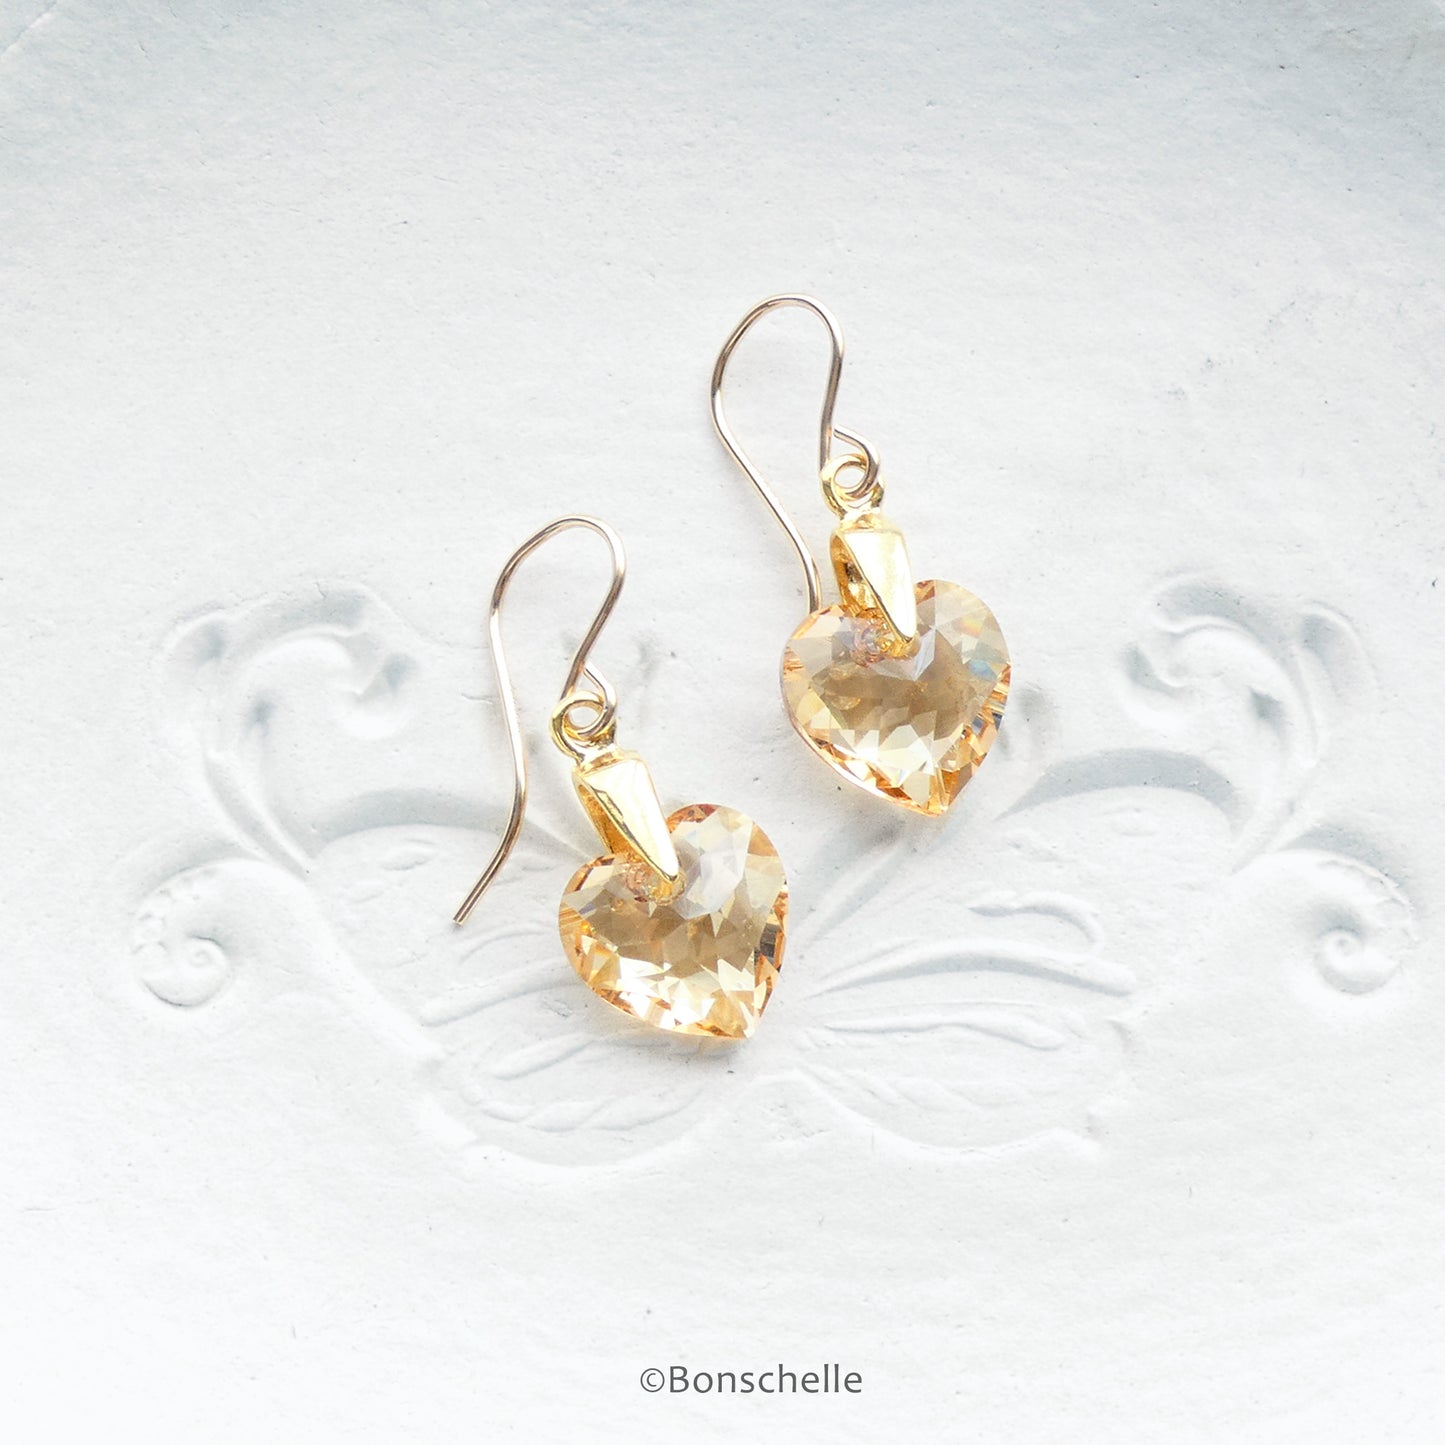 Handmade earrings with pale golden bronze toned Swarovski crystal heart earrings and 14K gold filled earwires 